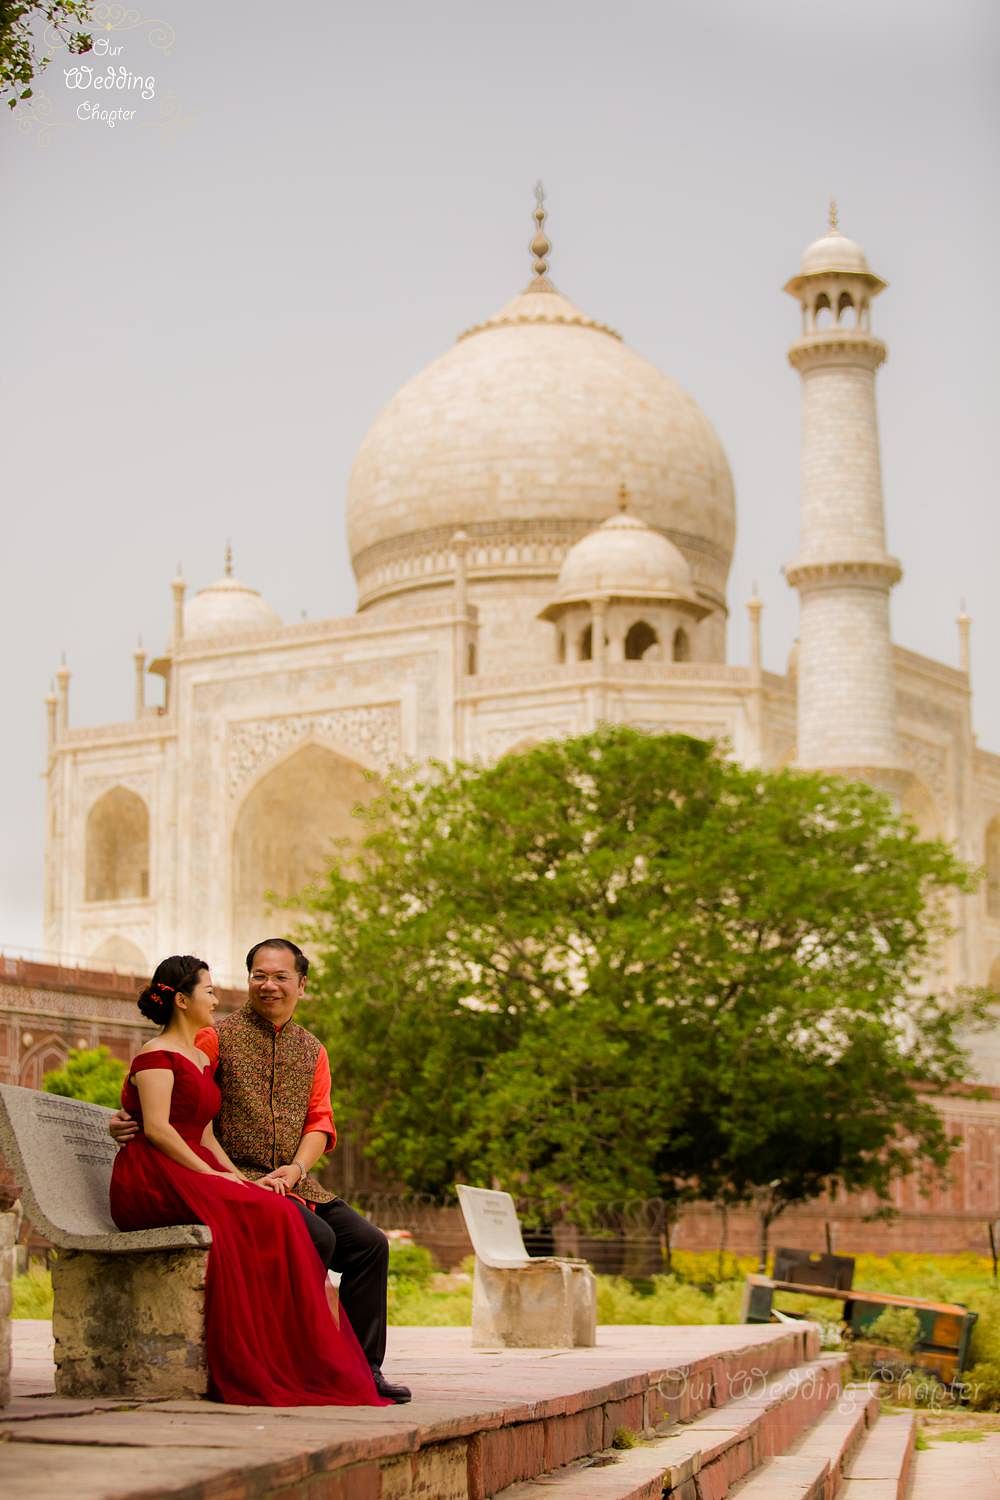 They posed in front of the Taj Mahal, but of course. (Photo Courtesy: Our Wedding Chapter)